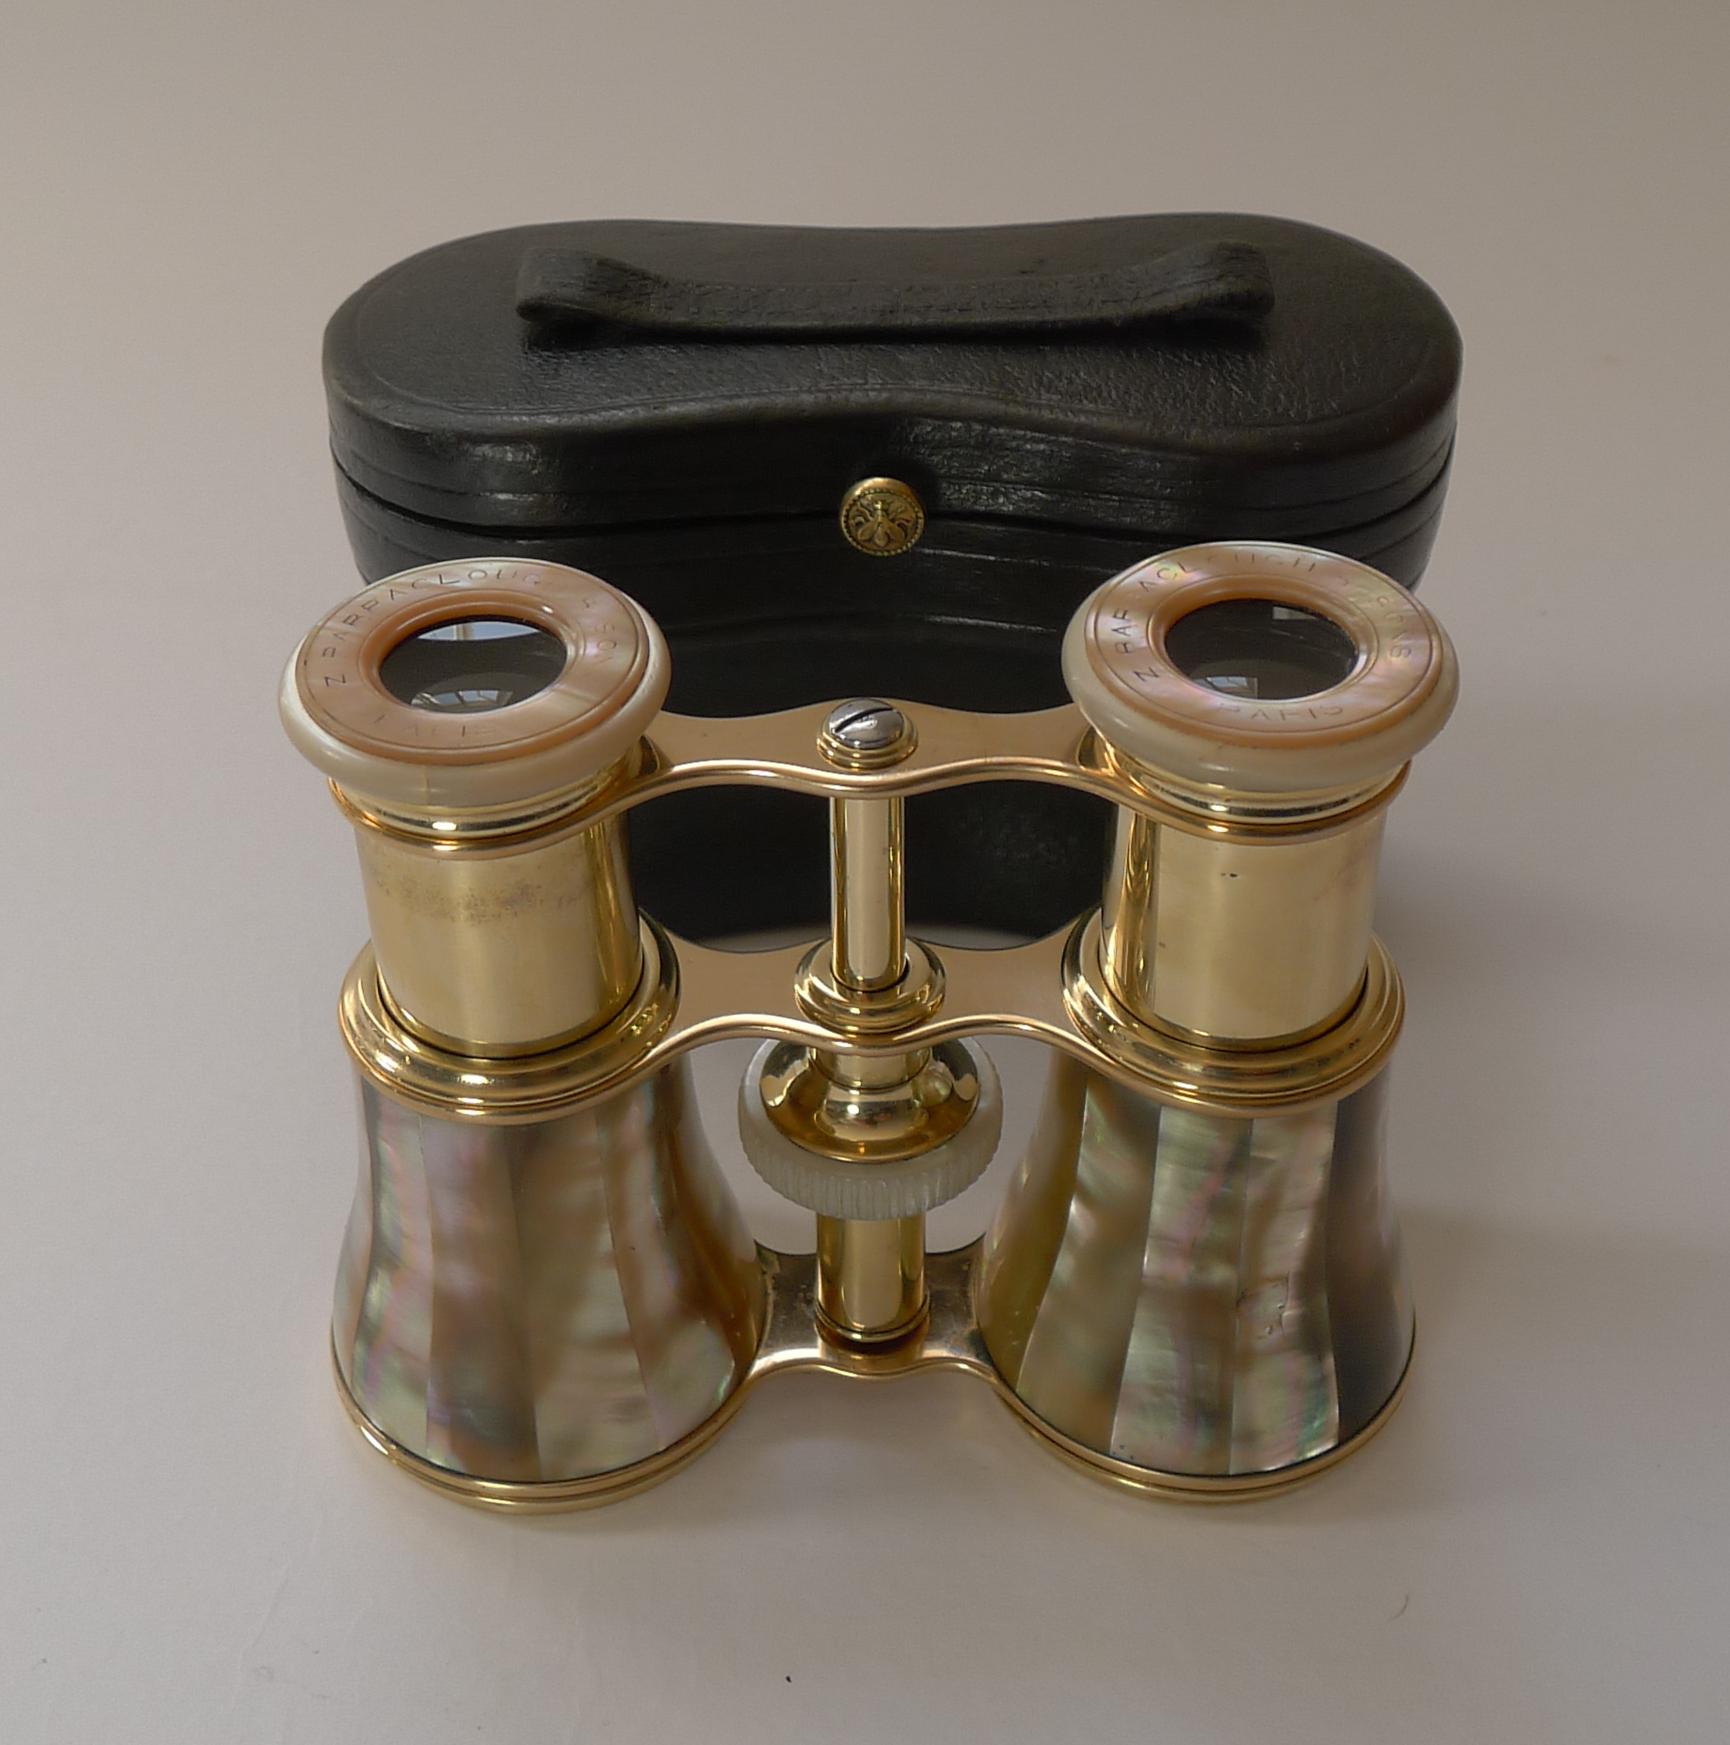 A superb pair of French opera glasses clad in stunning mother of pearl or Nacre shell with it's magical iridescent qualities.

In full working order, both eyepieces are engraved and inked by the maker, Zachariah Barraclough & Sons.

Complete